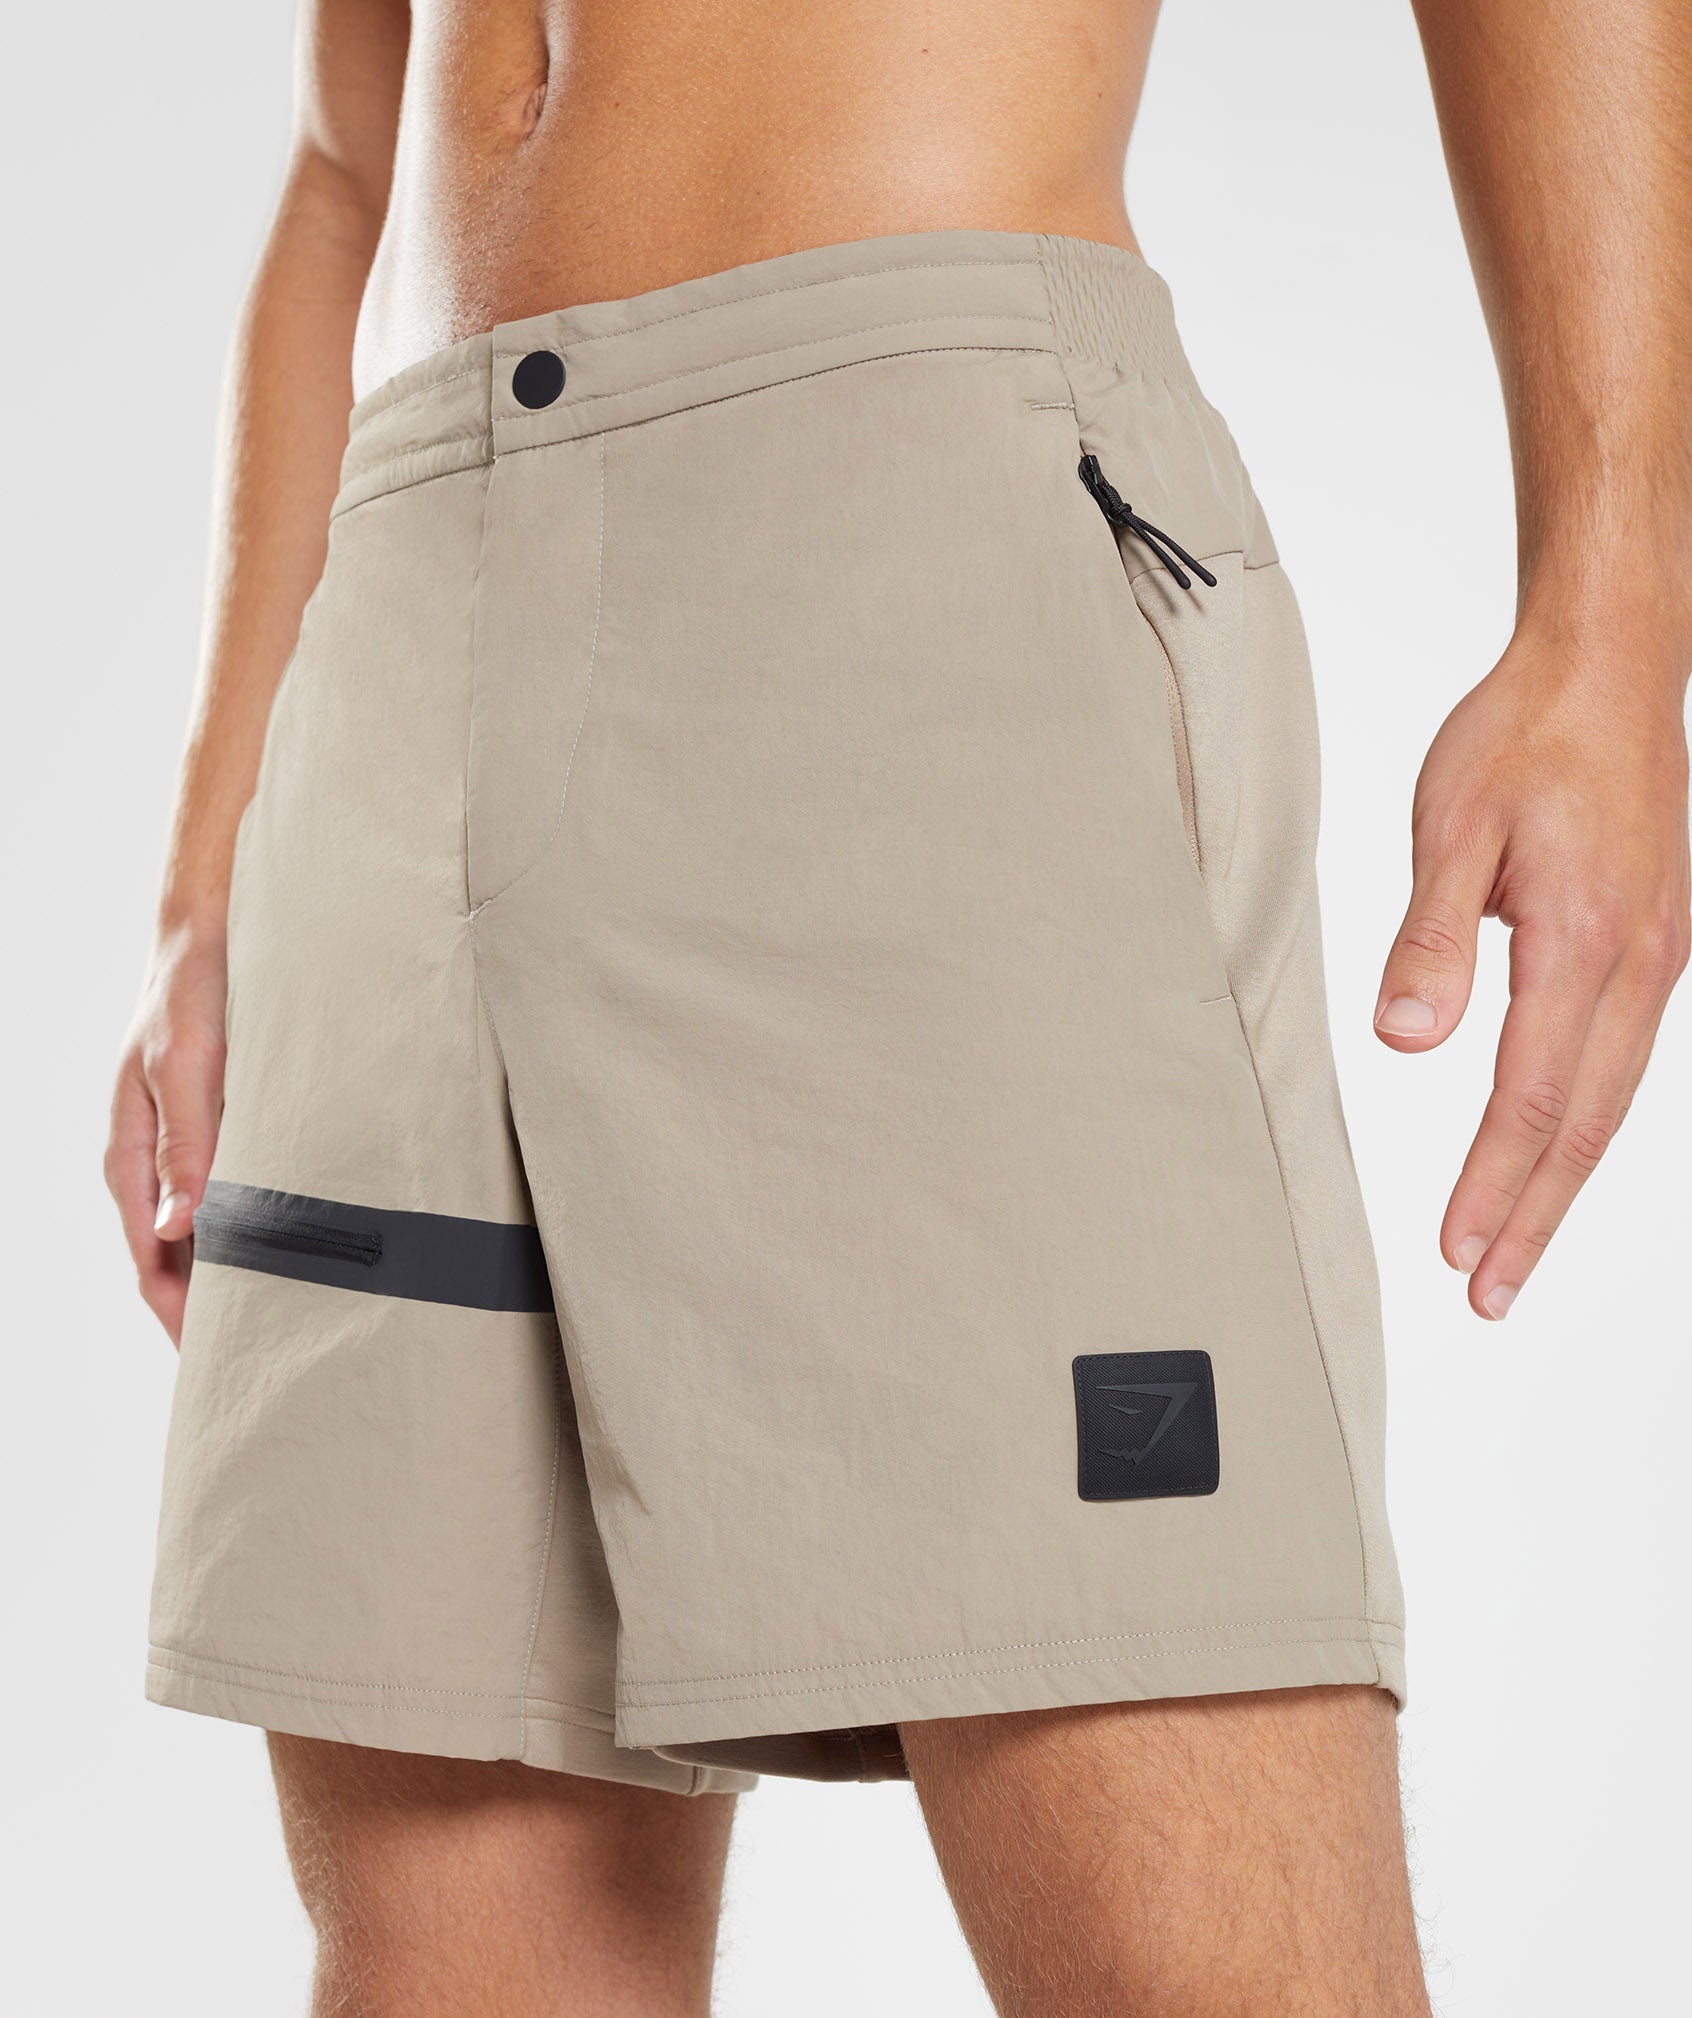 Retake Woven 7" Shorts in Cement Brown - view 5